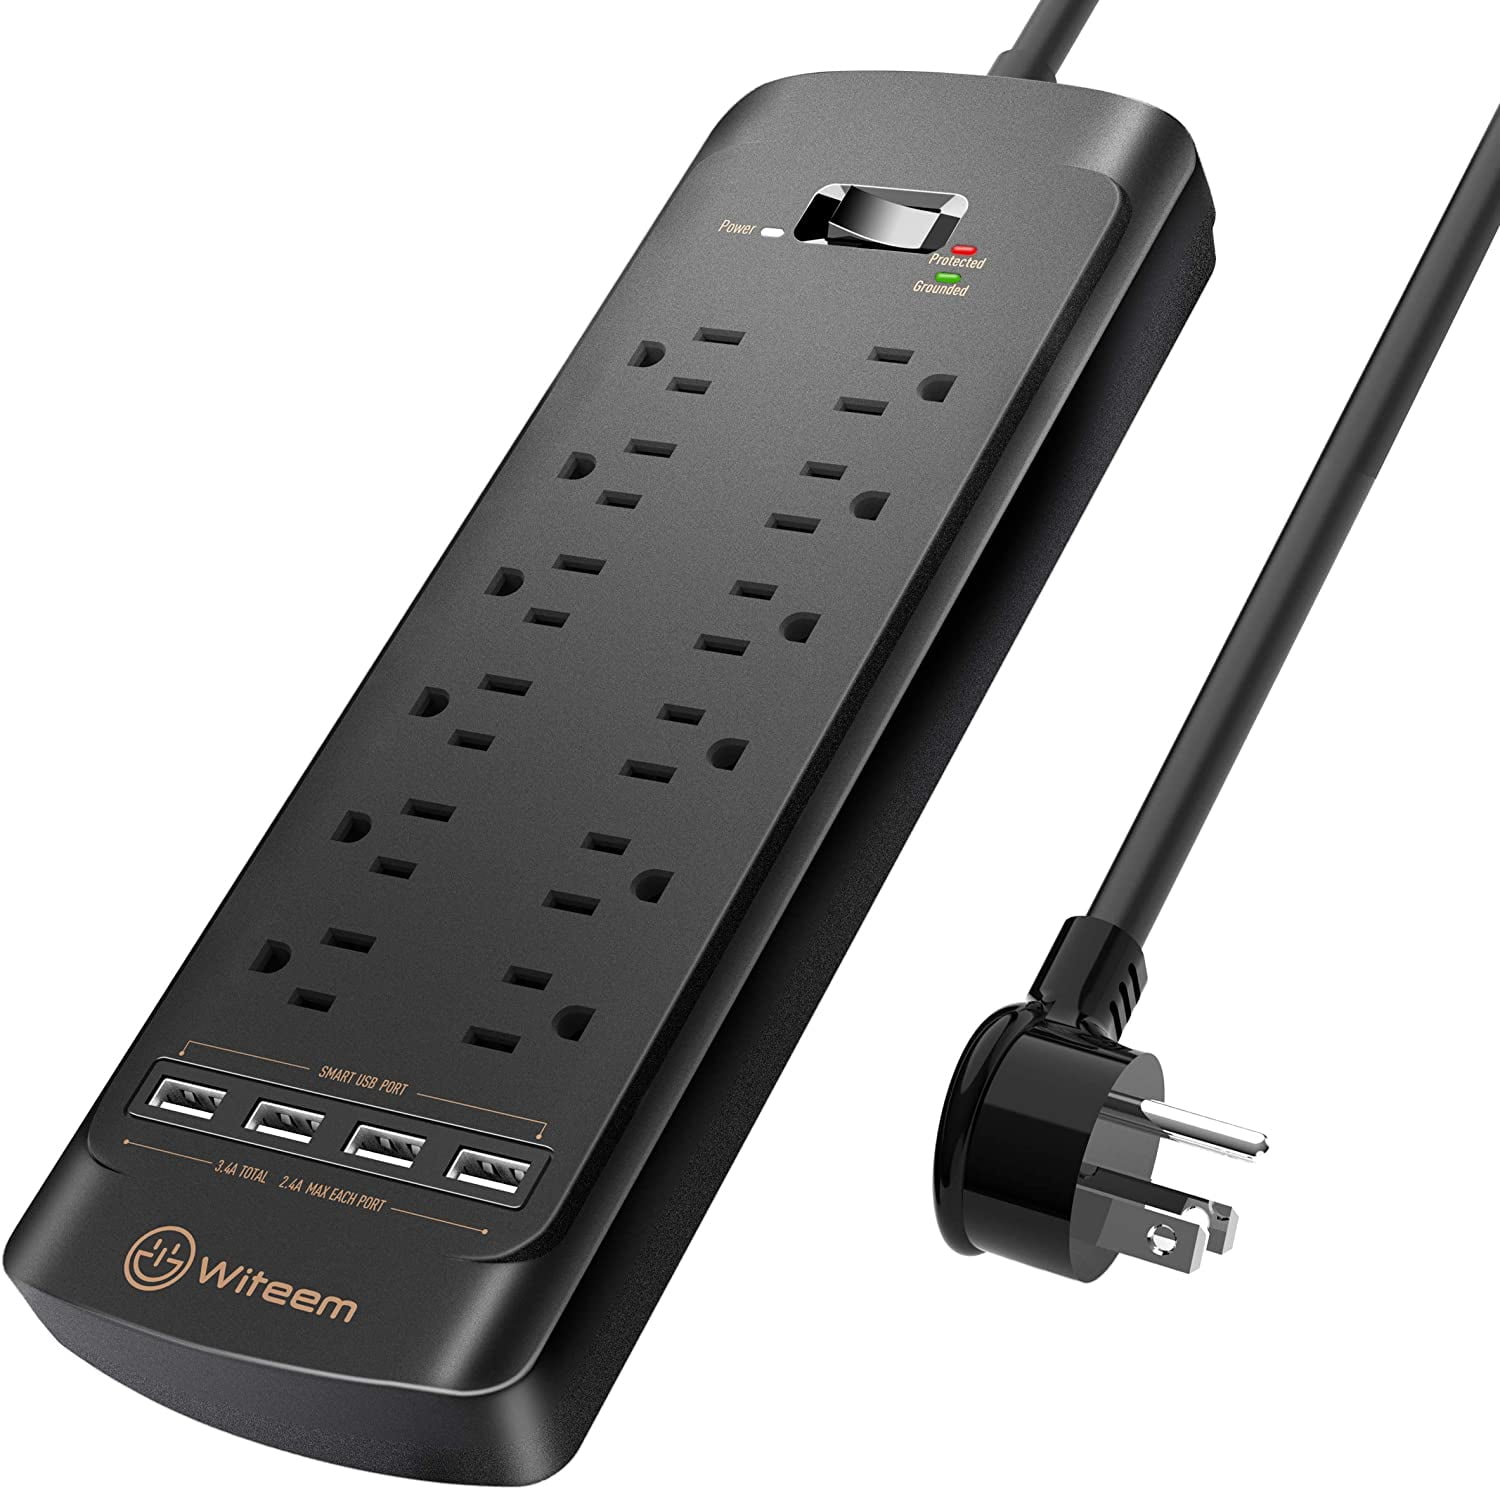 Muyumoon 2 Prong Power Strip Surge Protector with 3 Outlets and 4 